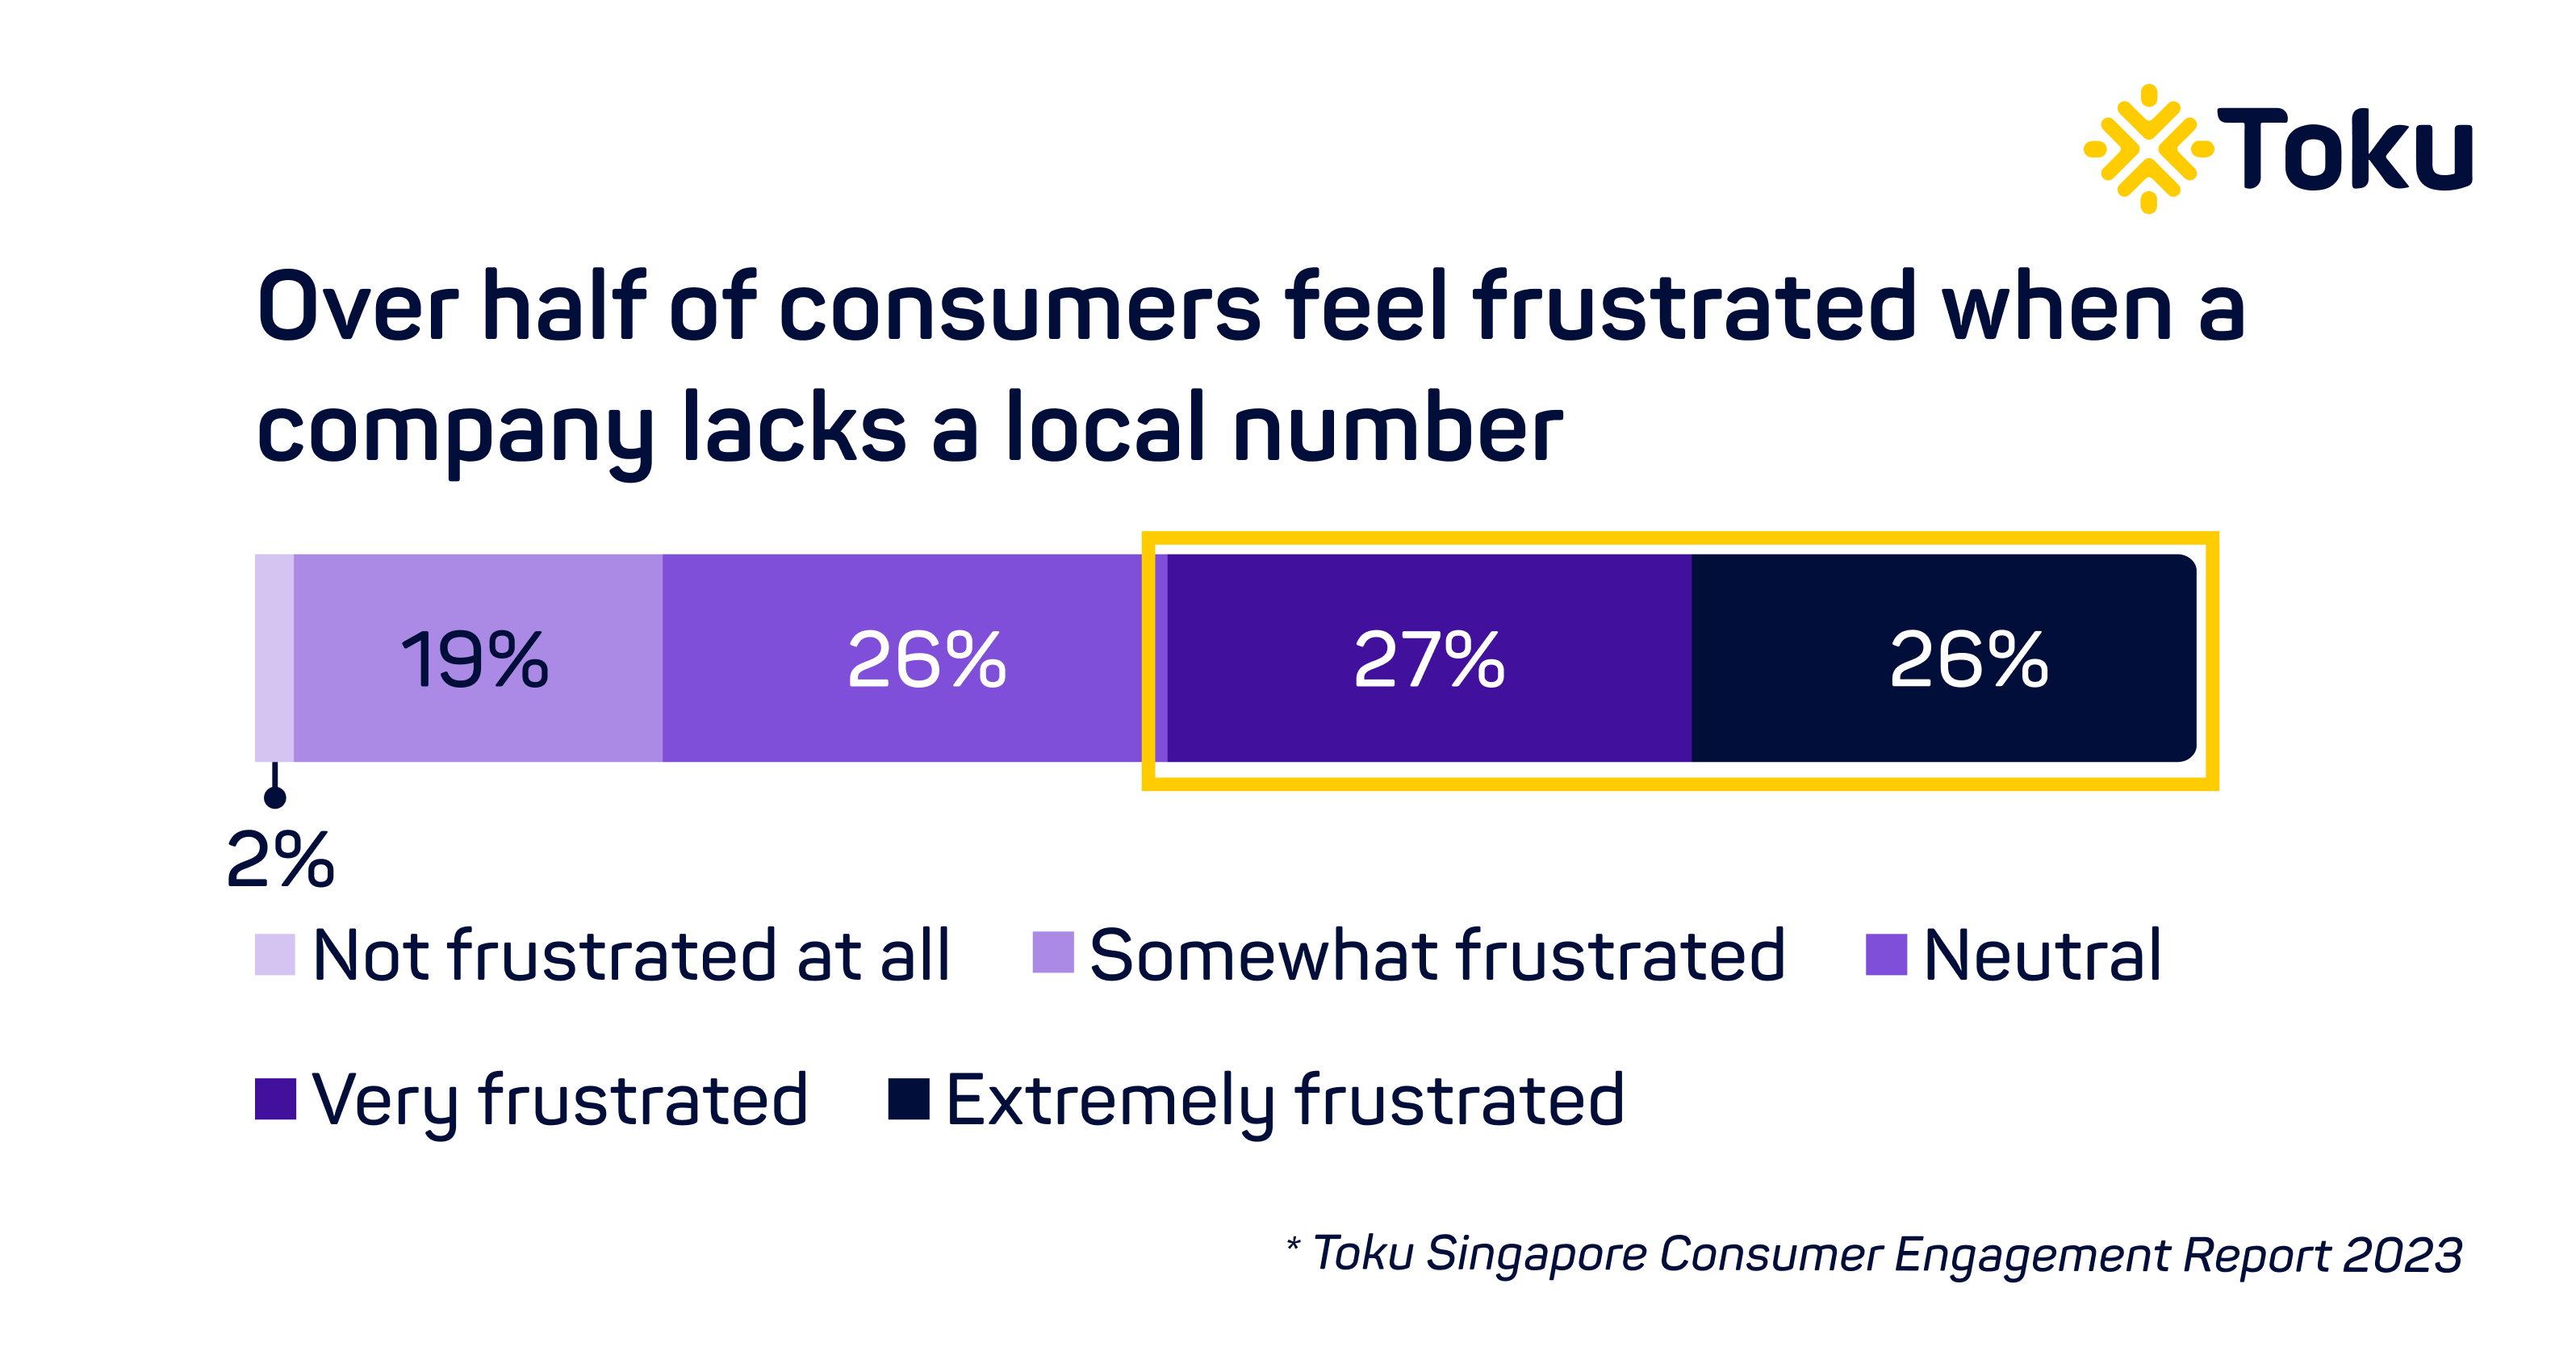 Over half of consumers frustrated if company lacks local number